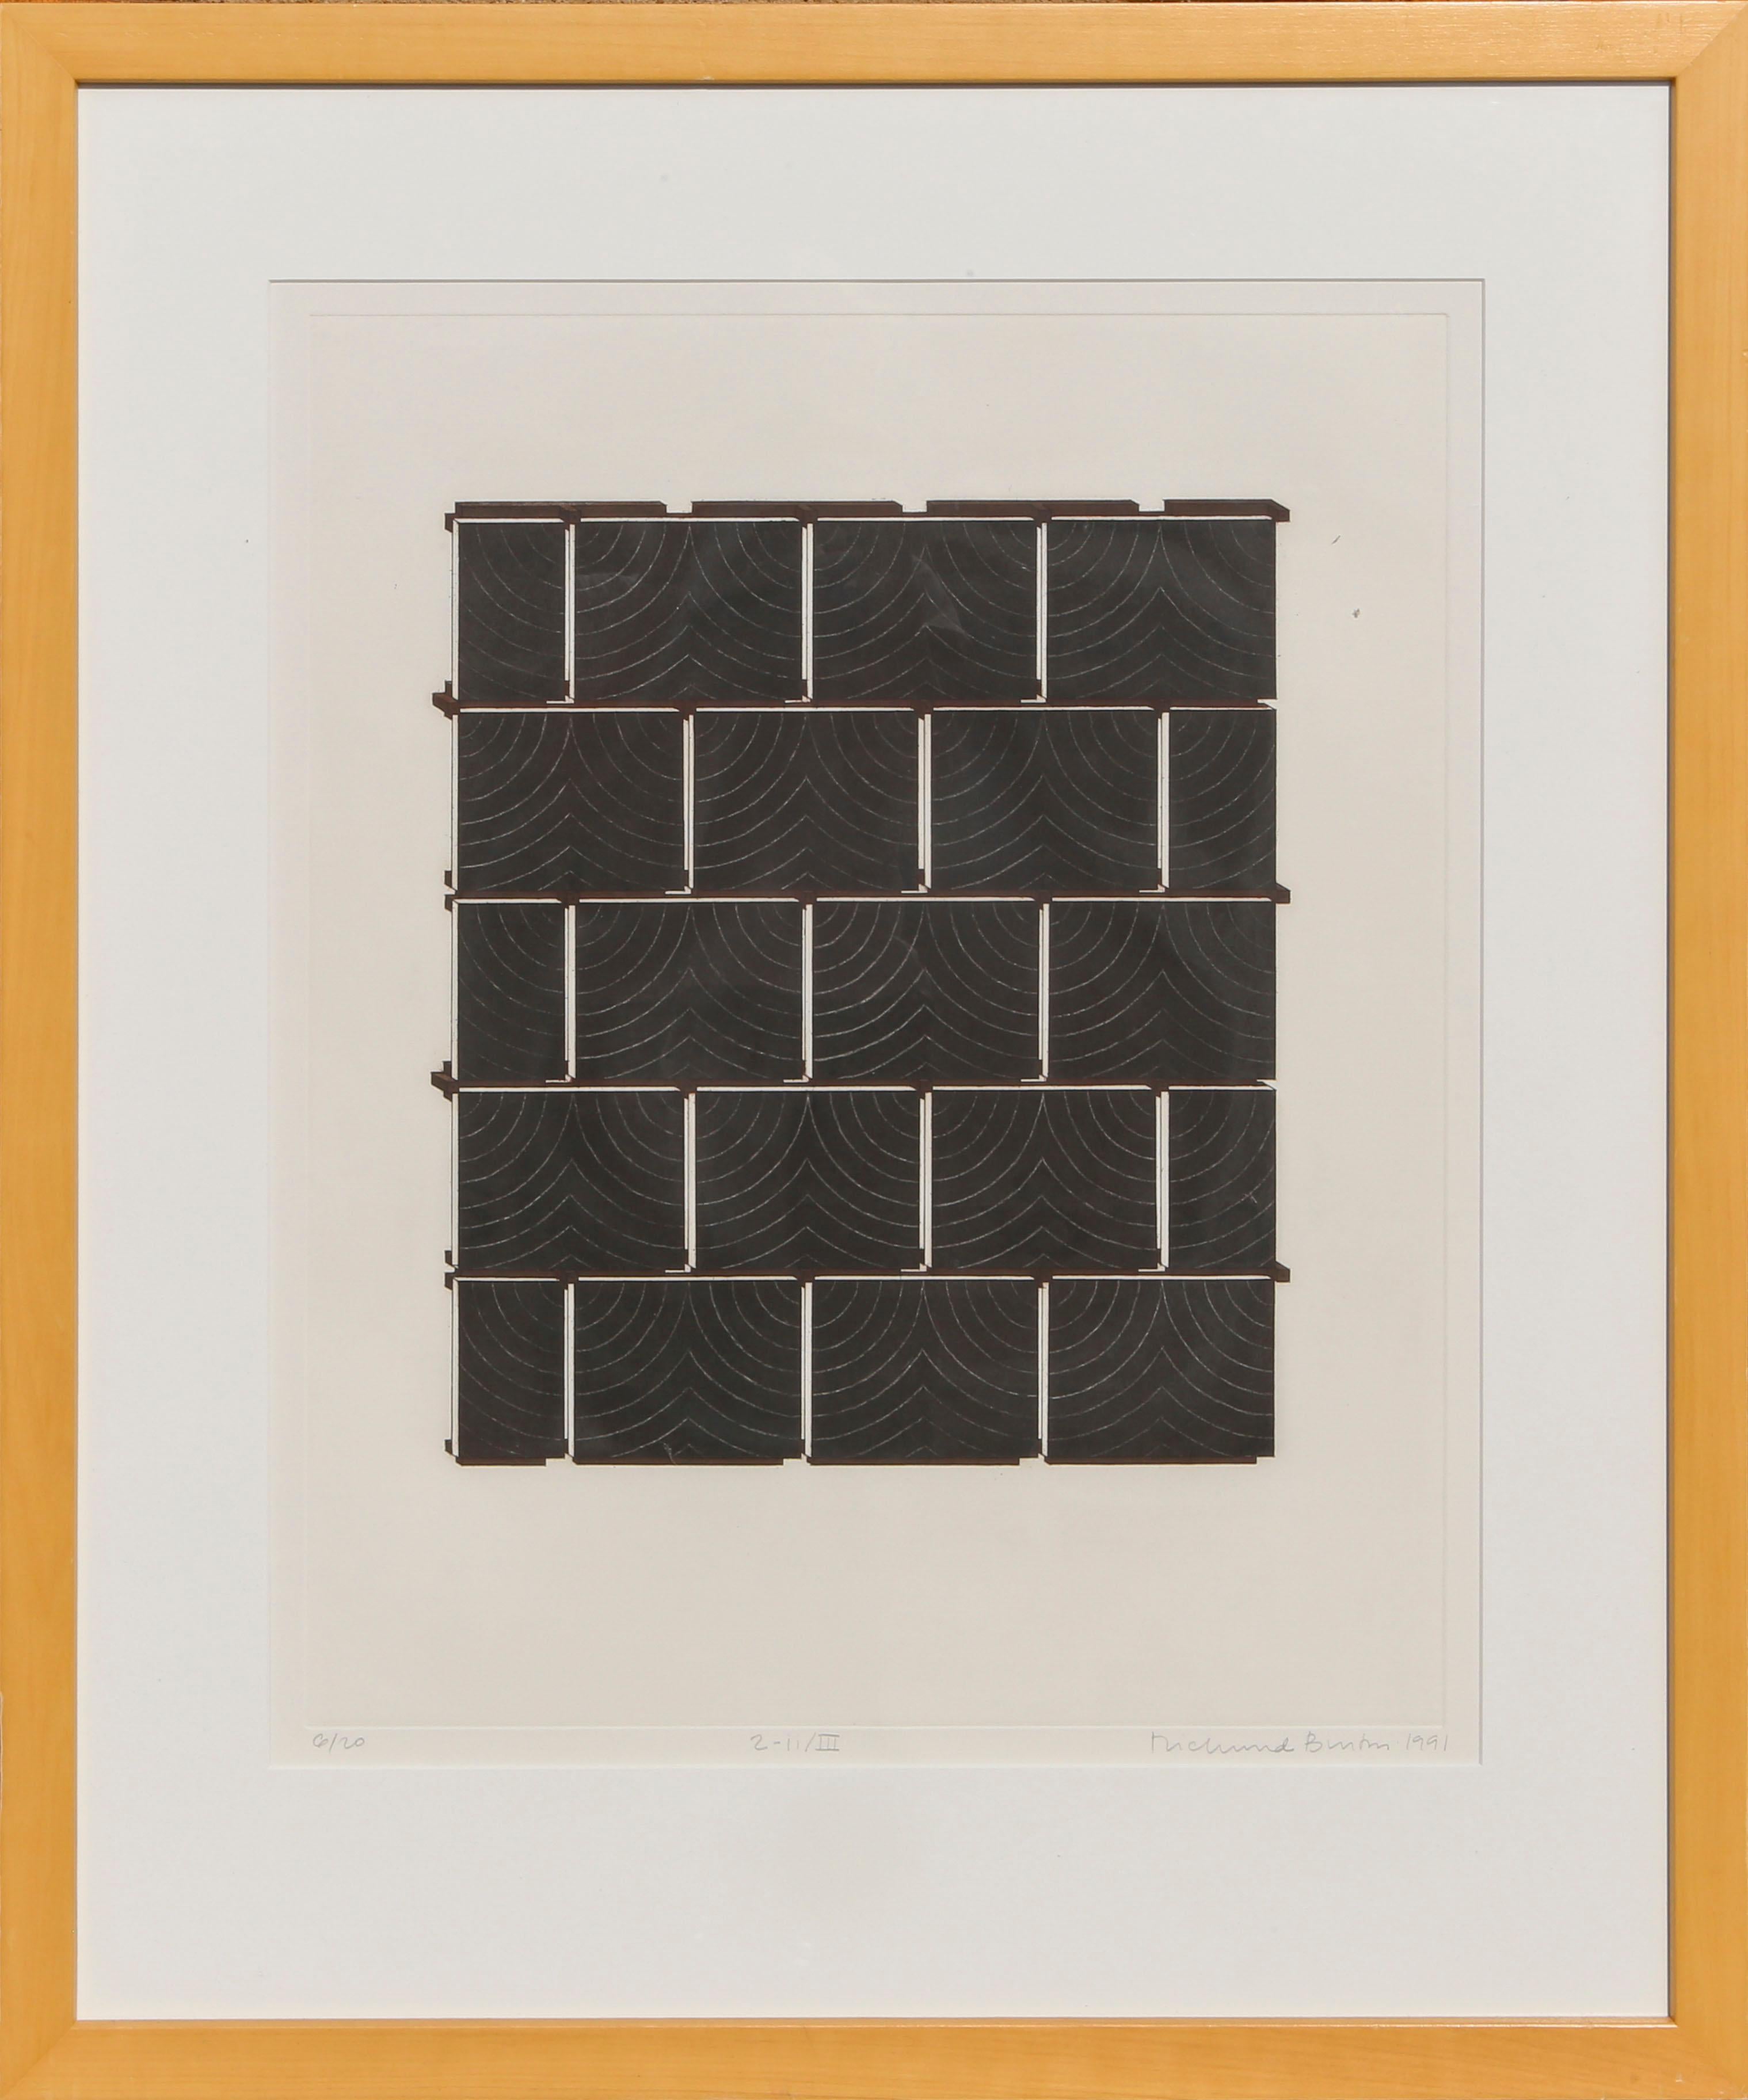 A minimalist print that at first glance resembles a brick wall. However, behind the grid, there is a repeating circular pattern that overlaps itself like perfect symmetrical waves. This print is signed, numbered, and titled by the artist in